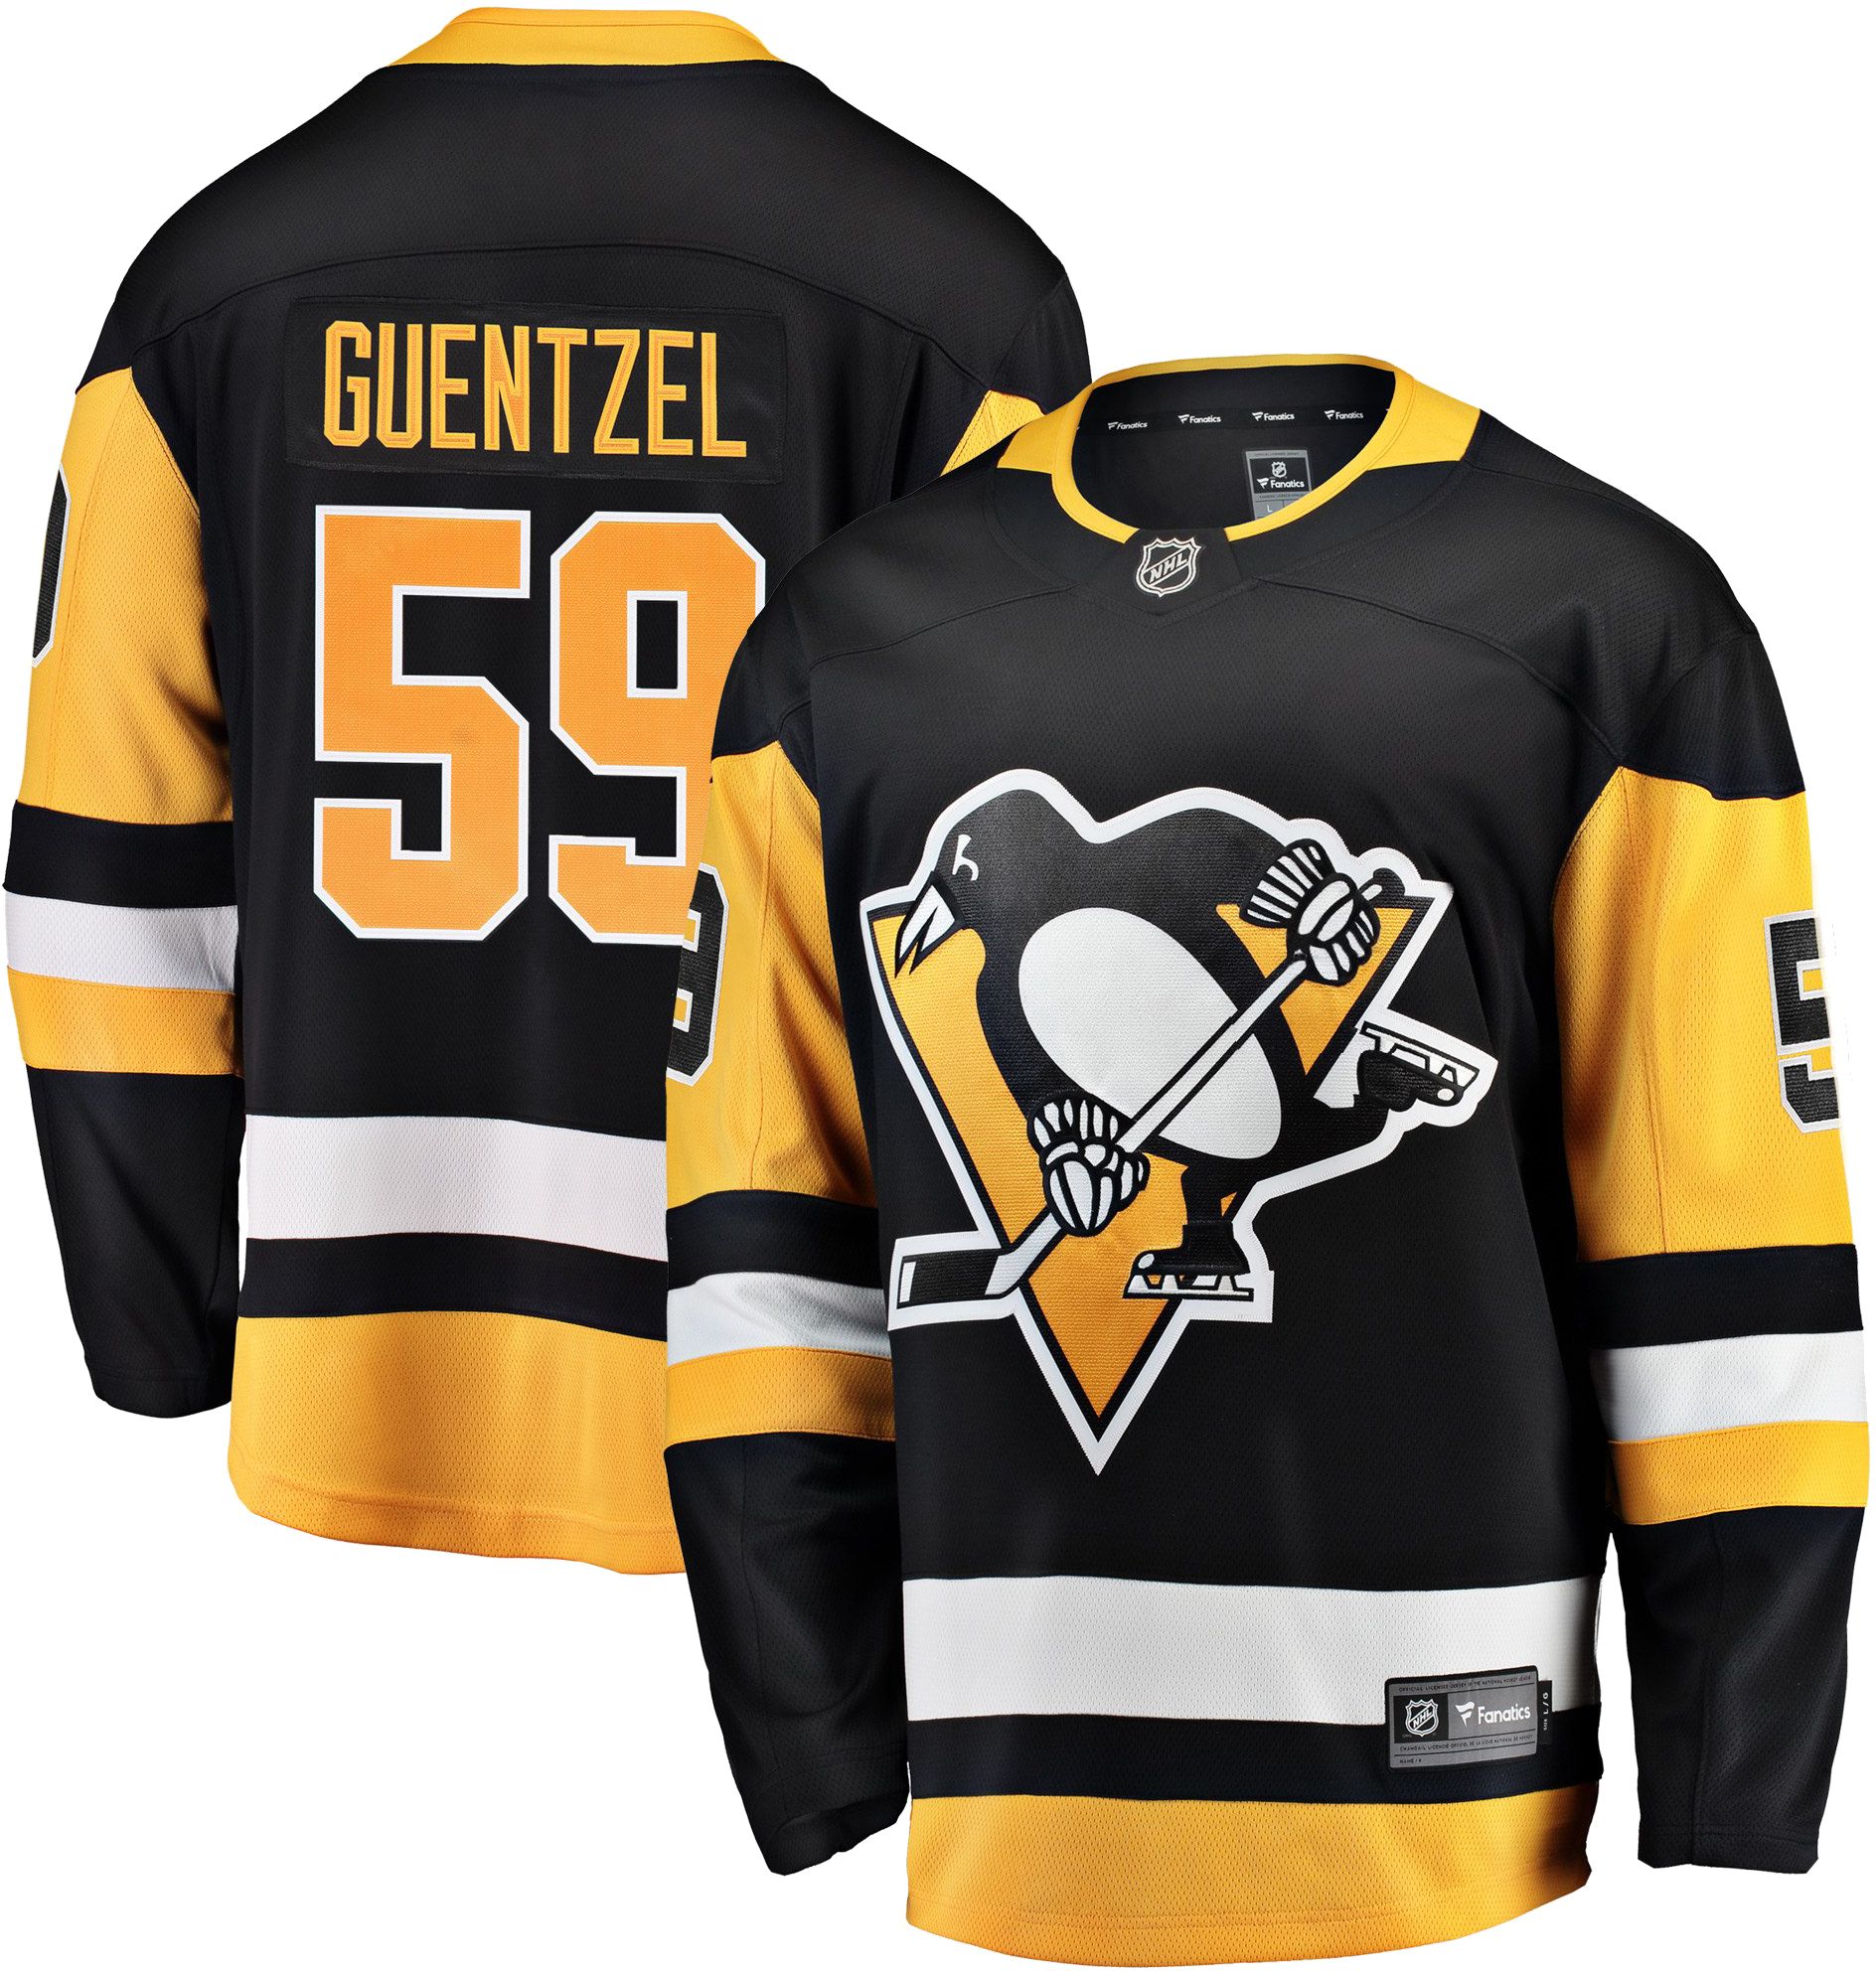 pittsburgh penguins jersey numbers